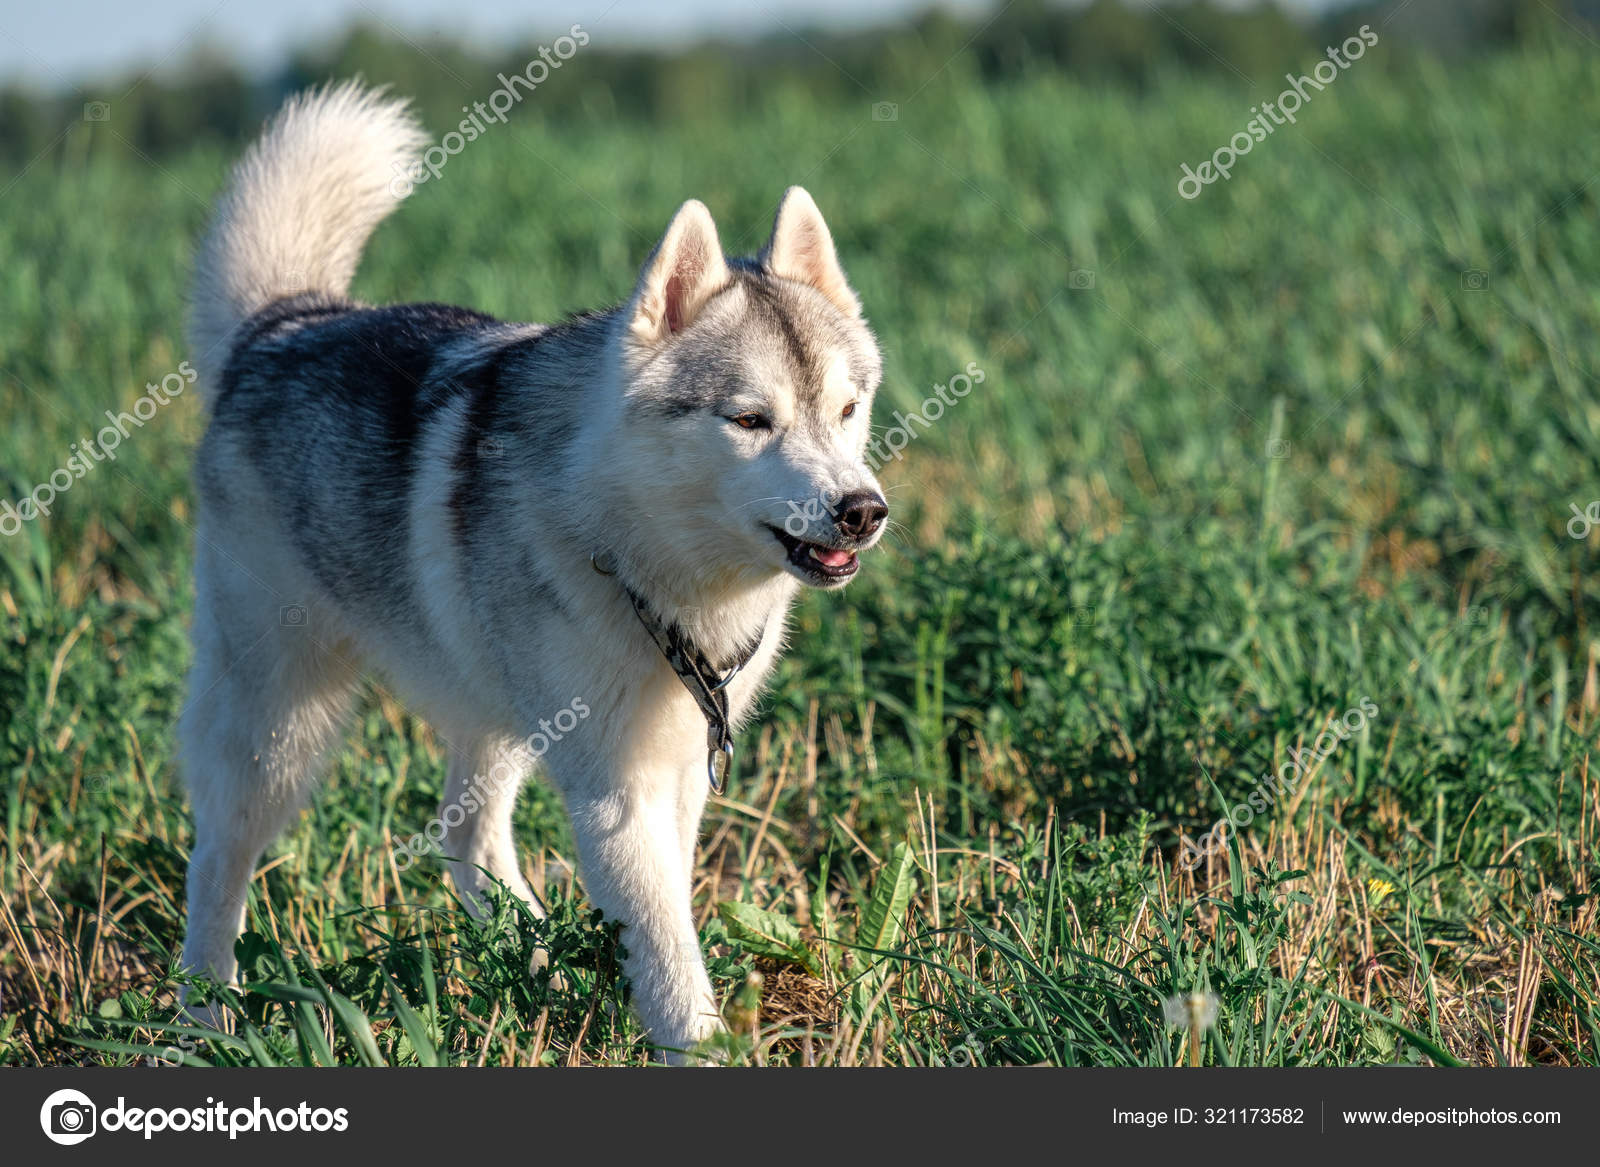 Angry Dog Slightly Grinned And Ran Across The Field Stock Photo C Metelevan 321173582